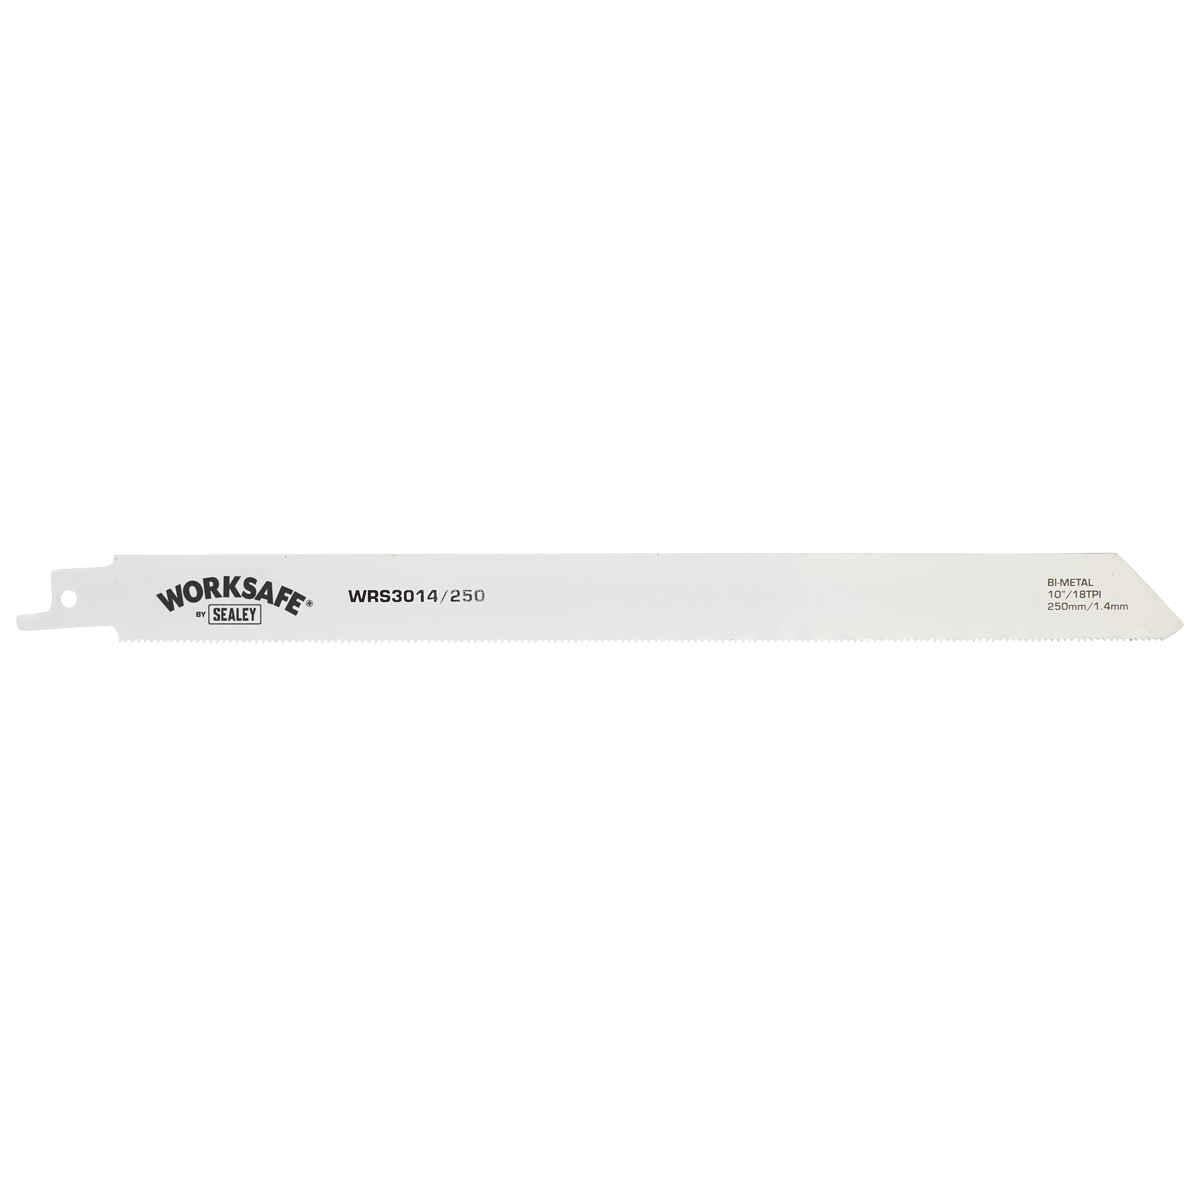 Sealey WRS3014/250 Reciprocating Saw Blade Metal 250mm 18tpi - Pack of 5